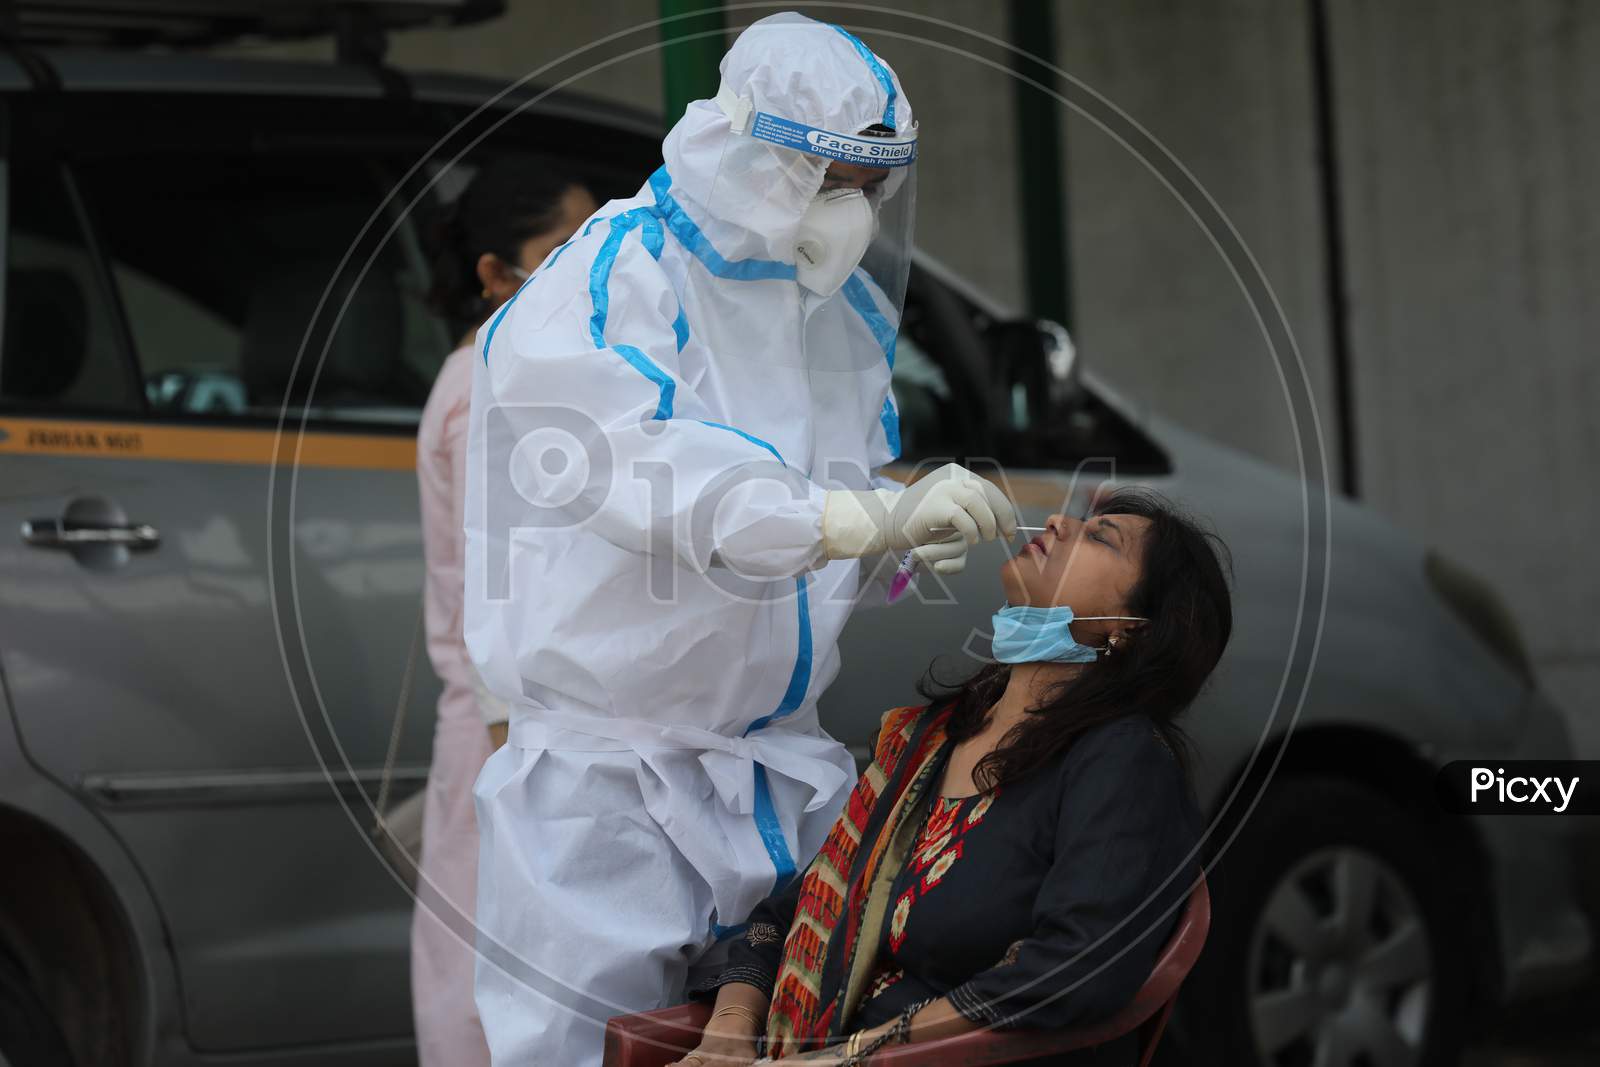 A health worker collects swab samples of the employees working for Directorate of Agriculture for Covid-19 testing at the agricultural office in Jammu on July 14, 2020